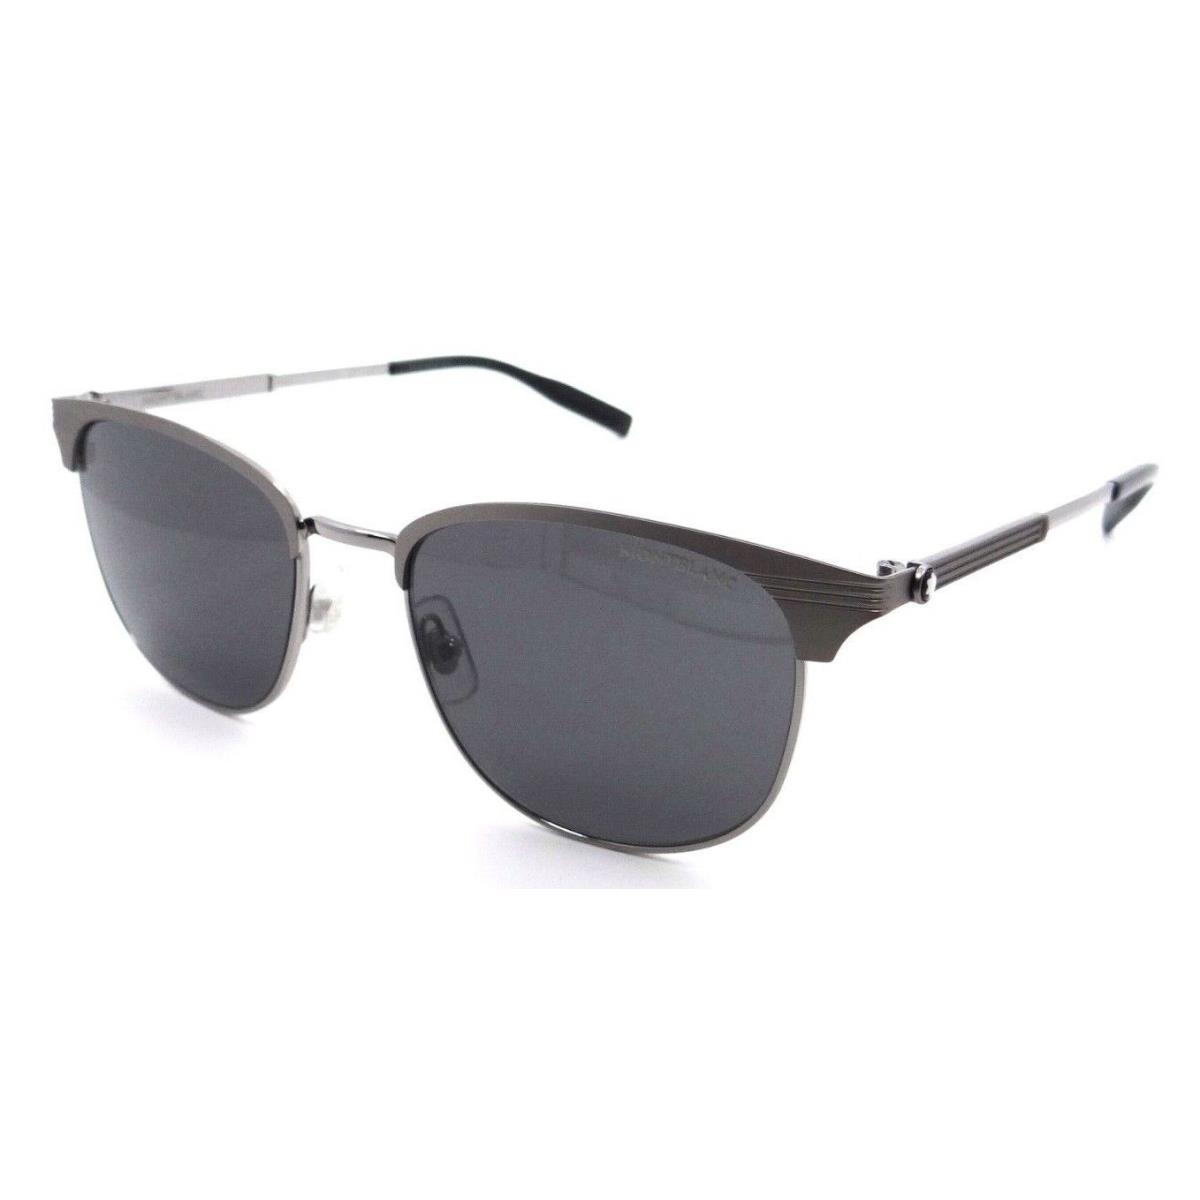 Montblanc Sunglasses MB0092S 007 54-19-145 Ruthenium / Grey Made in Italy